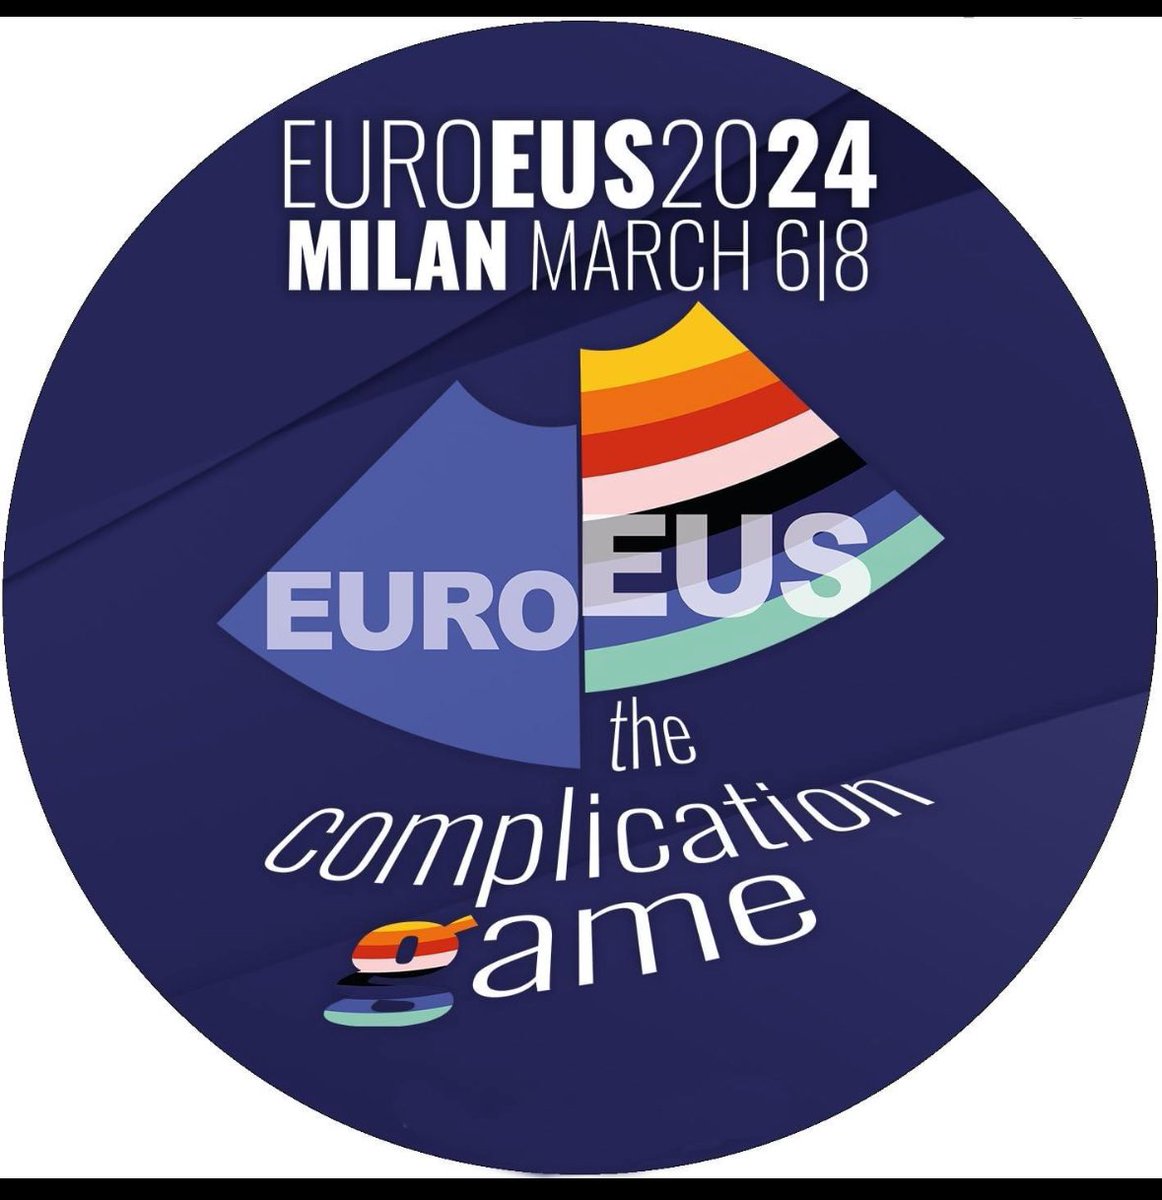 Inviting all “EUS enthusiasts” from all over the Globe to EURO EUS 2024. Theme “Adverse events”. Who talks about complications? Hear from the experts their story. #PaoloArcidiacono @JulioIglGar @AnandSahaiEUS @ChahalPrabhleen #ErwinSanto